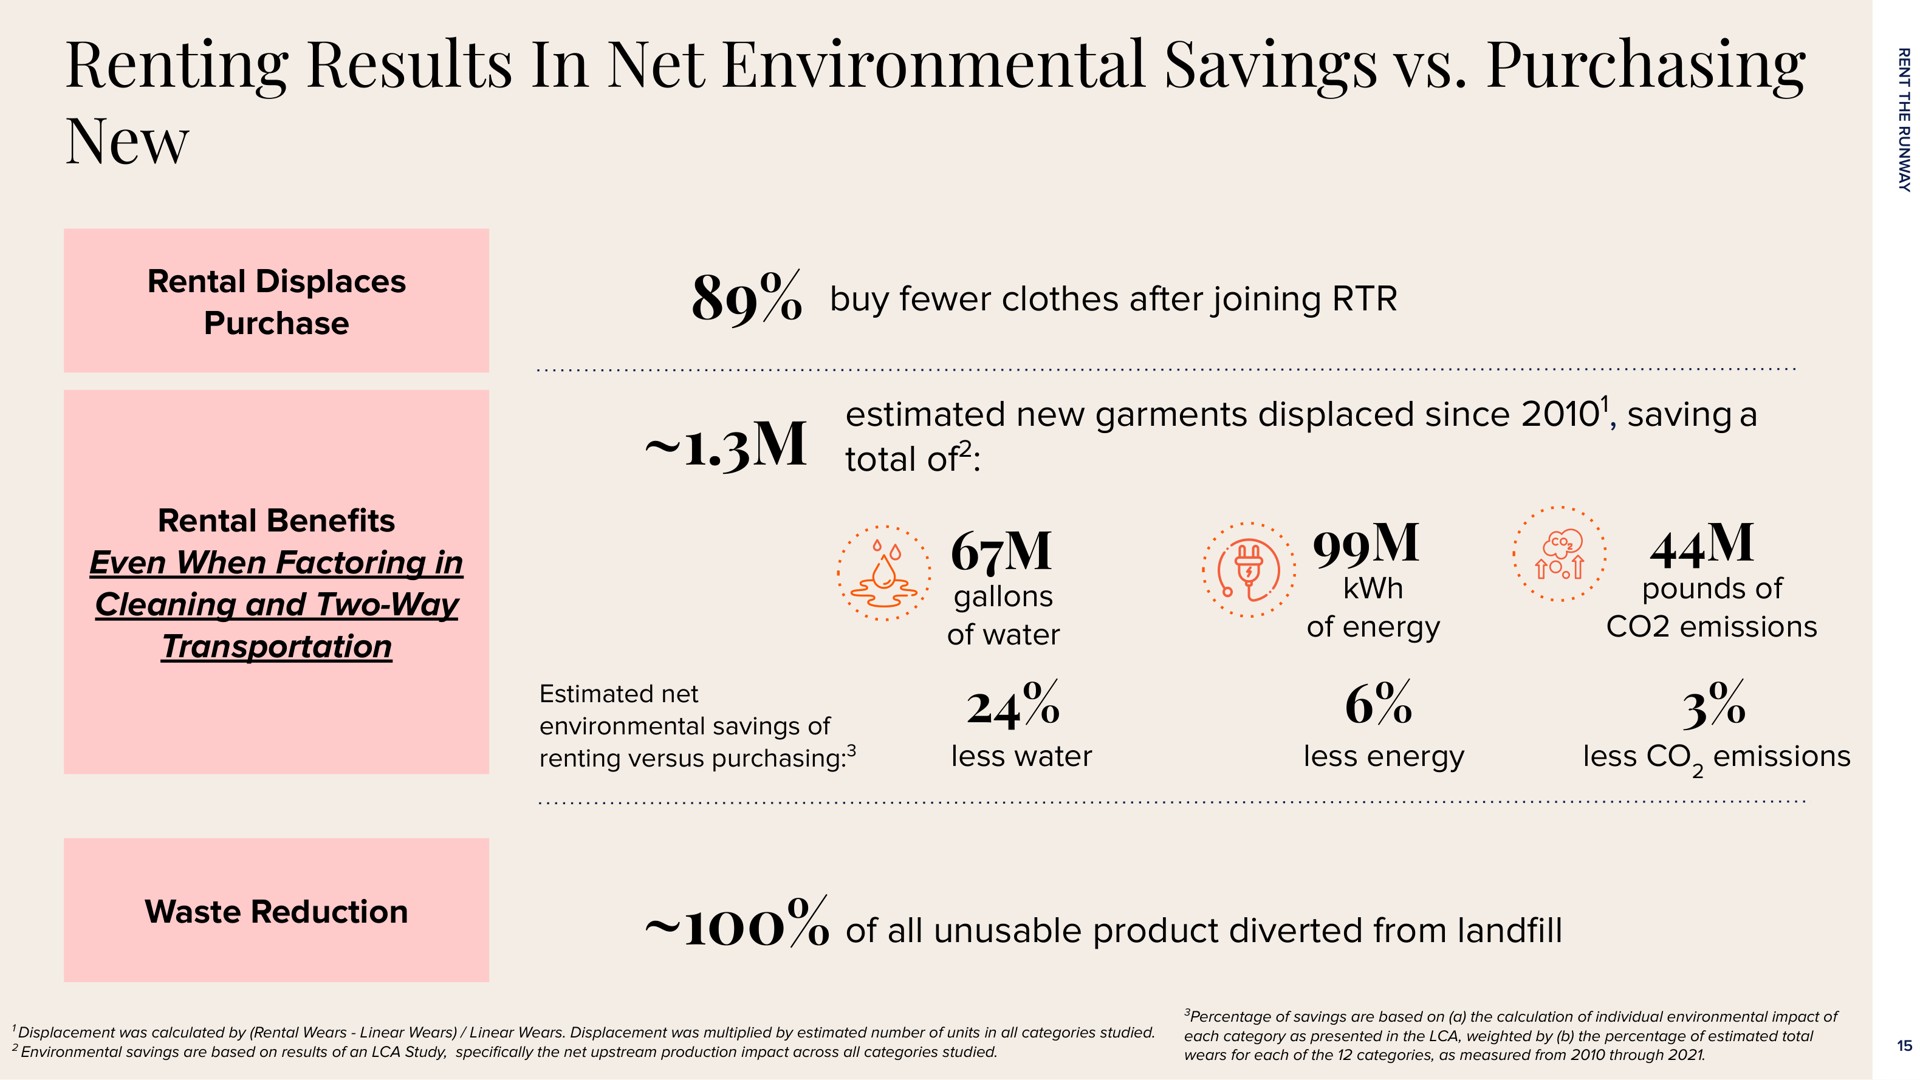 renting results in net environmental savings purchasing new even when factoring | Rent The Runway